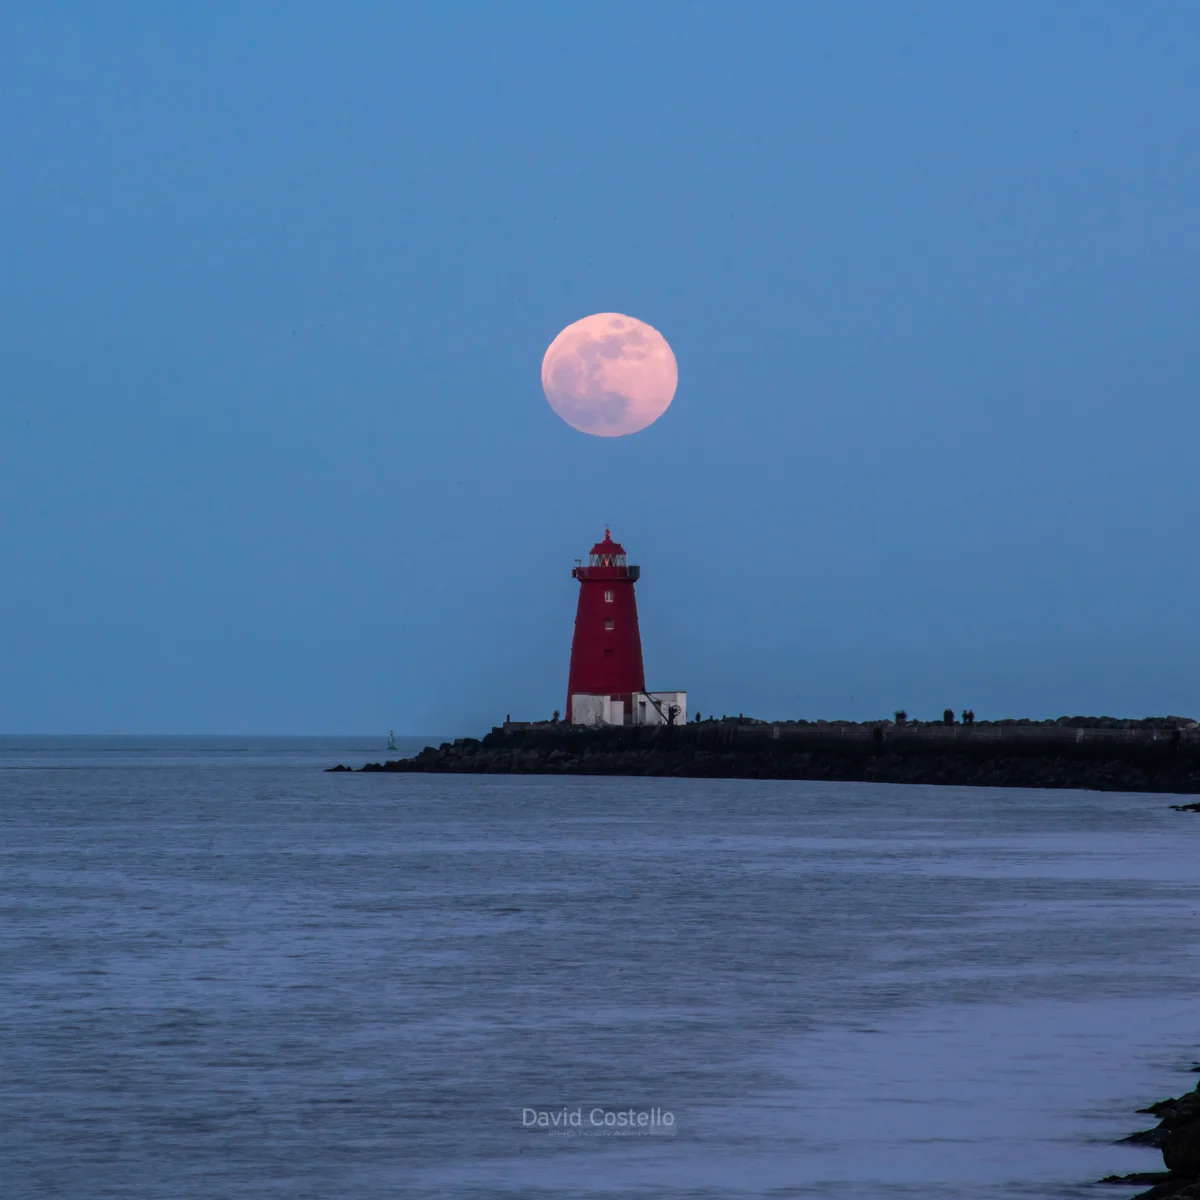 The Full Moon rises above Poolbeg Lighthouse on a beautiful crisp spring evening along the Great South Wall in Dublin.